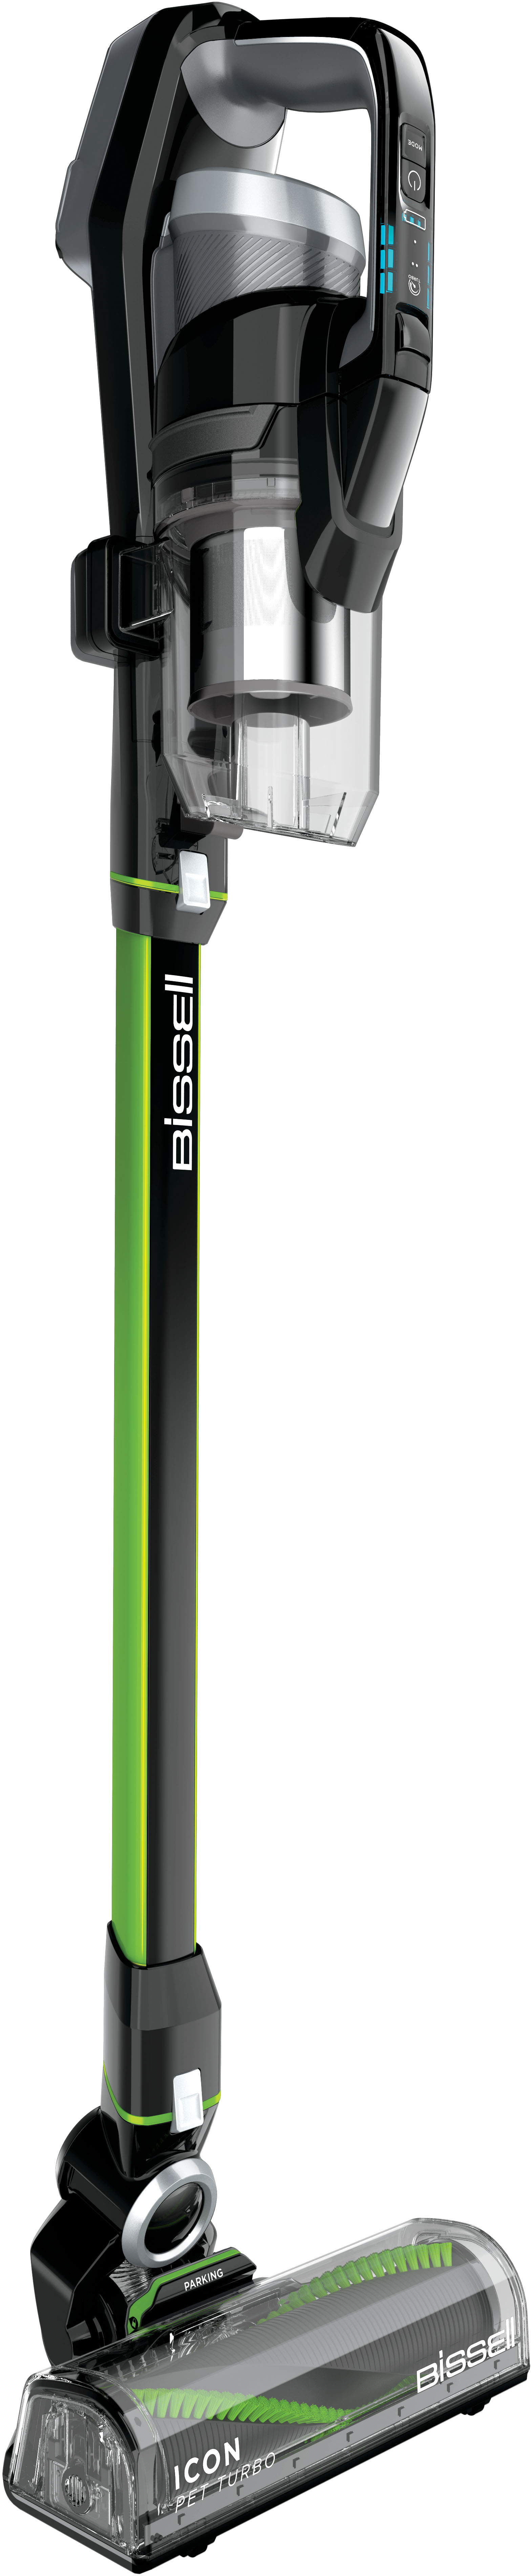 Angle View: BISSELL ICONPET TURBO EDGE Cordless Stick Vacuum - Black, Cha Cha Lime